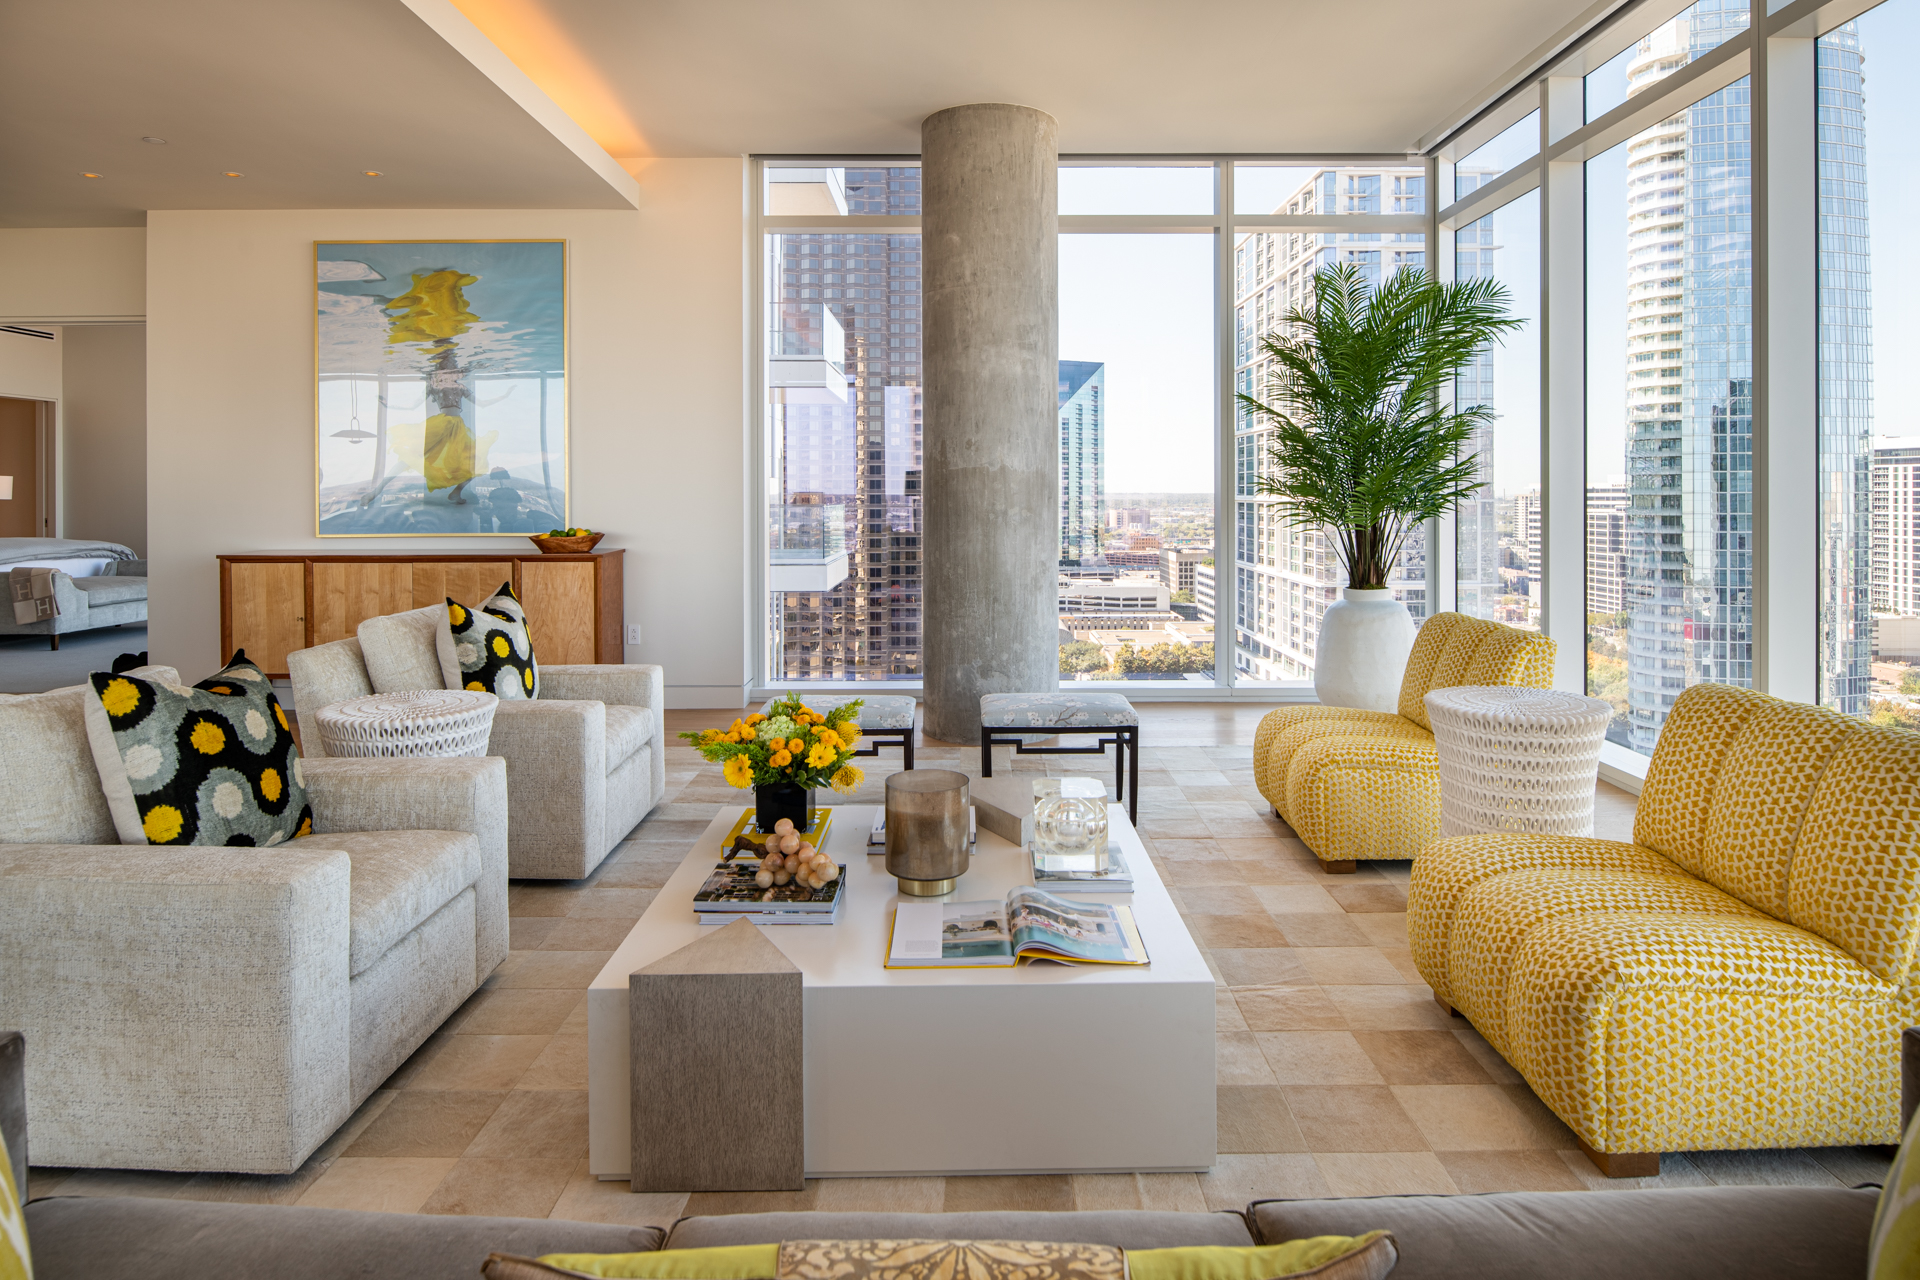 Living room with yellow and grey furniture and city views.